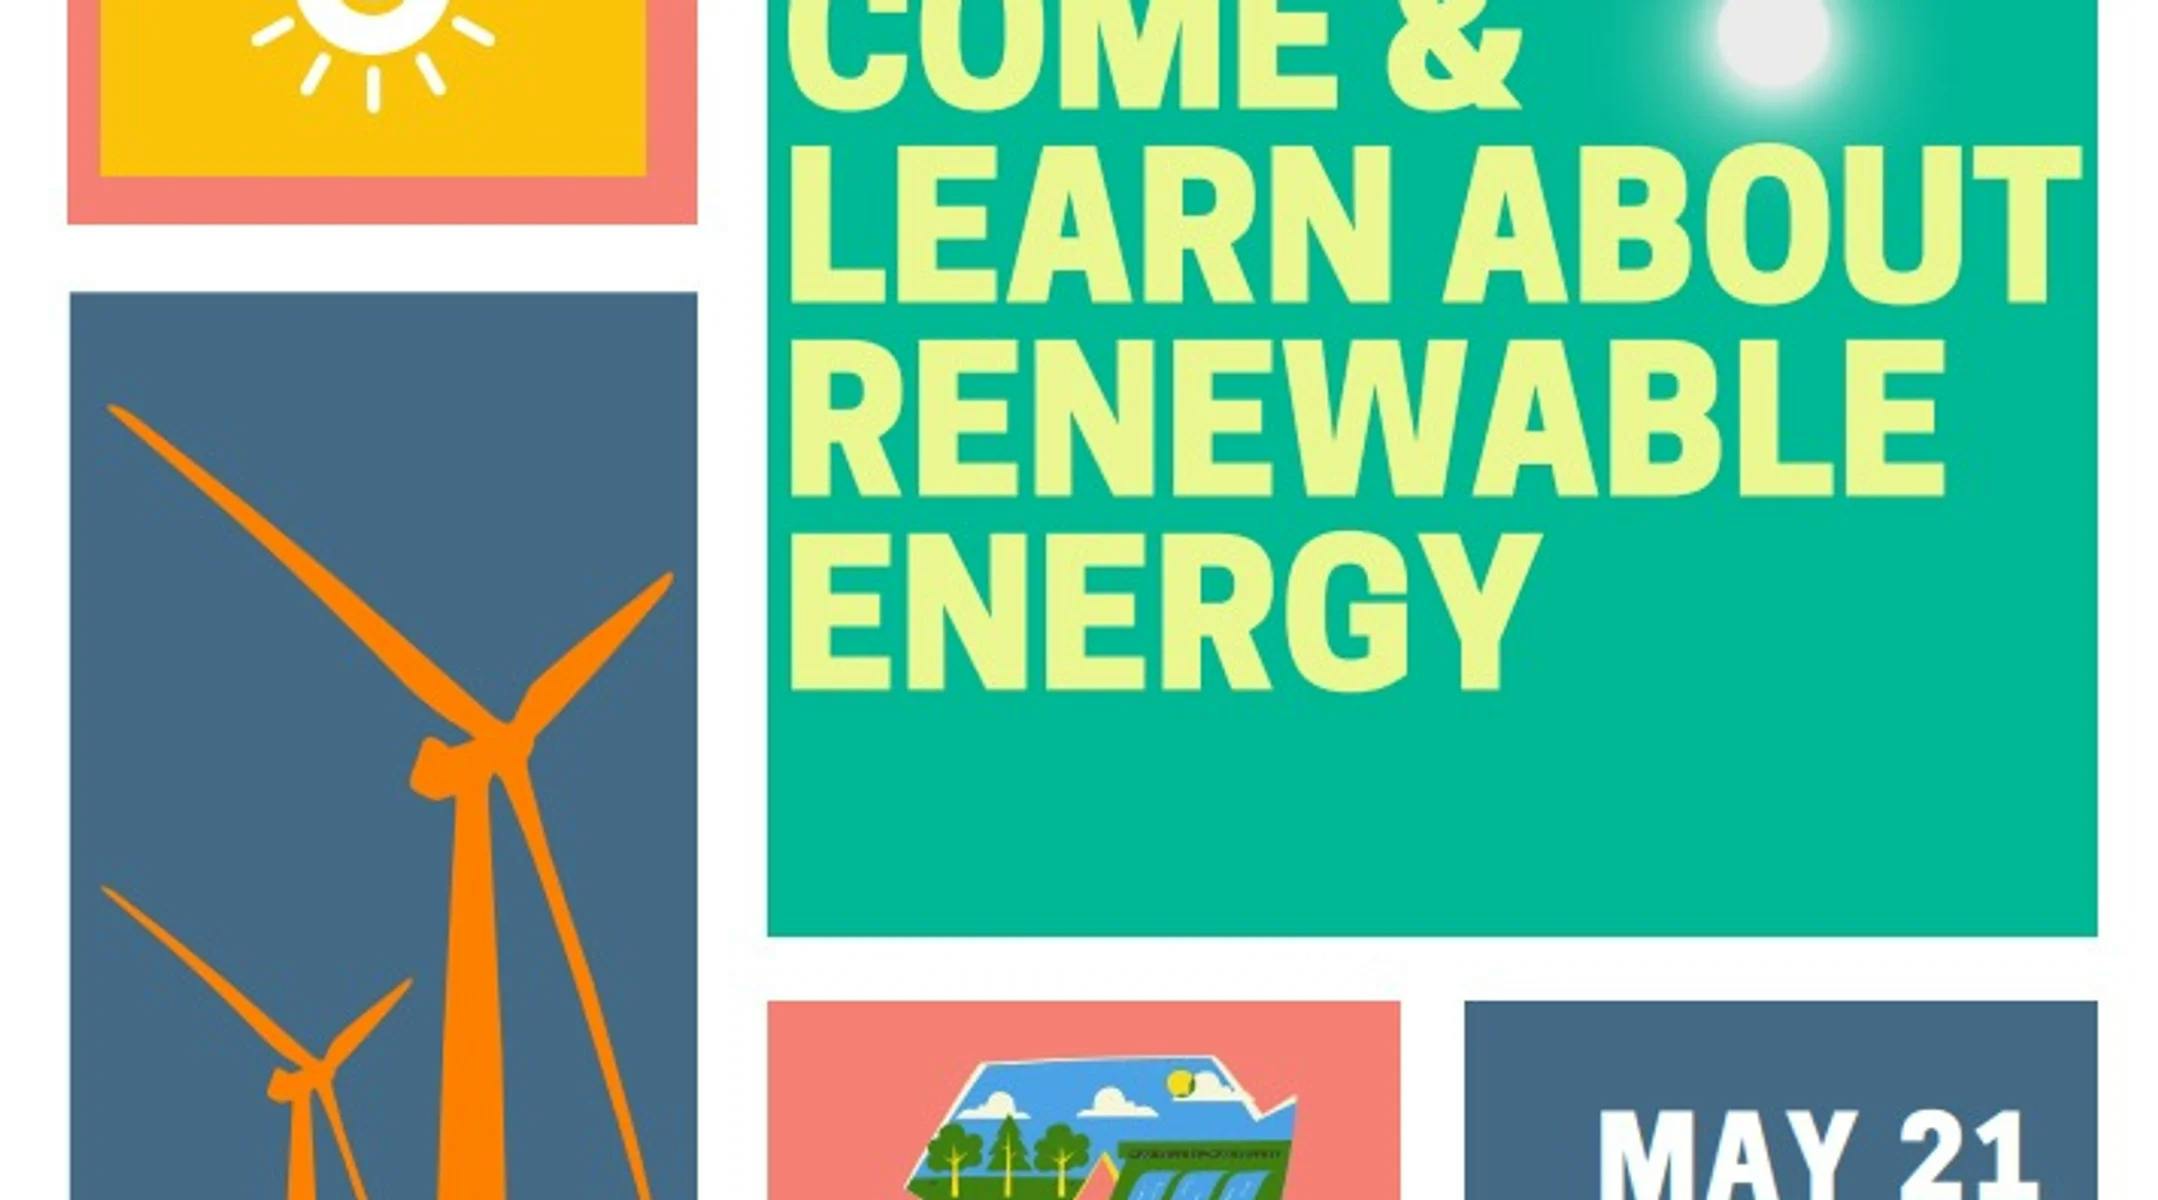 Come and learn about renewable energy